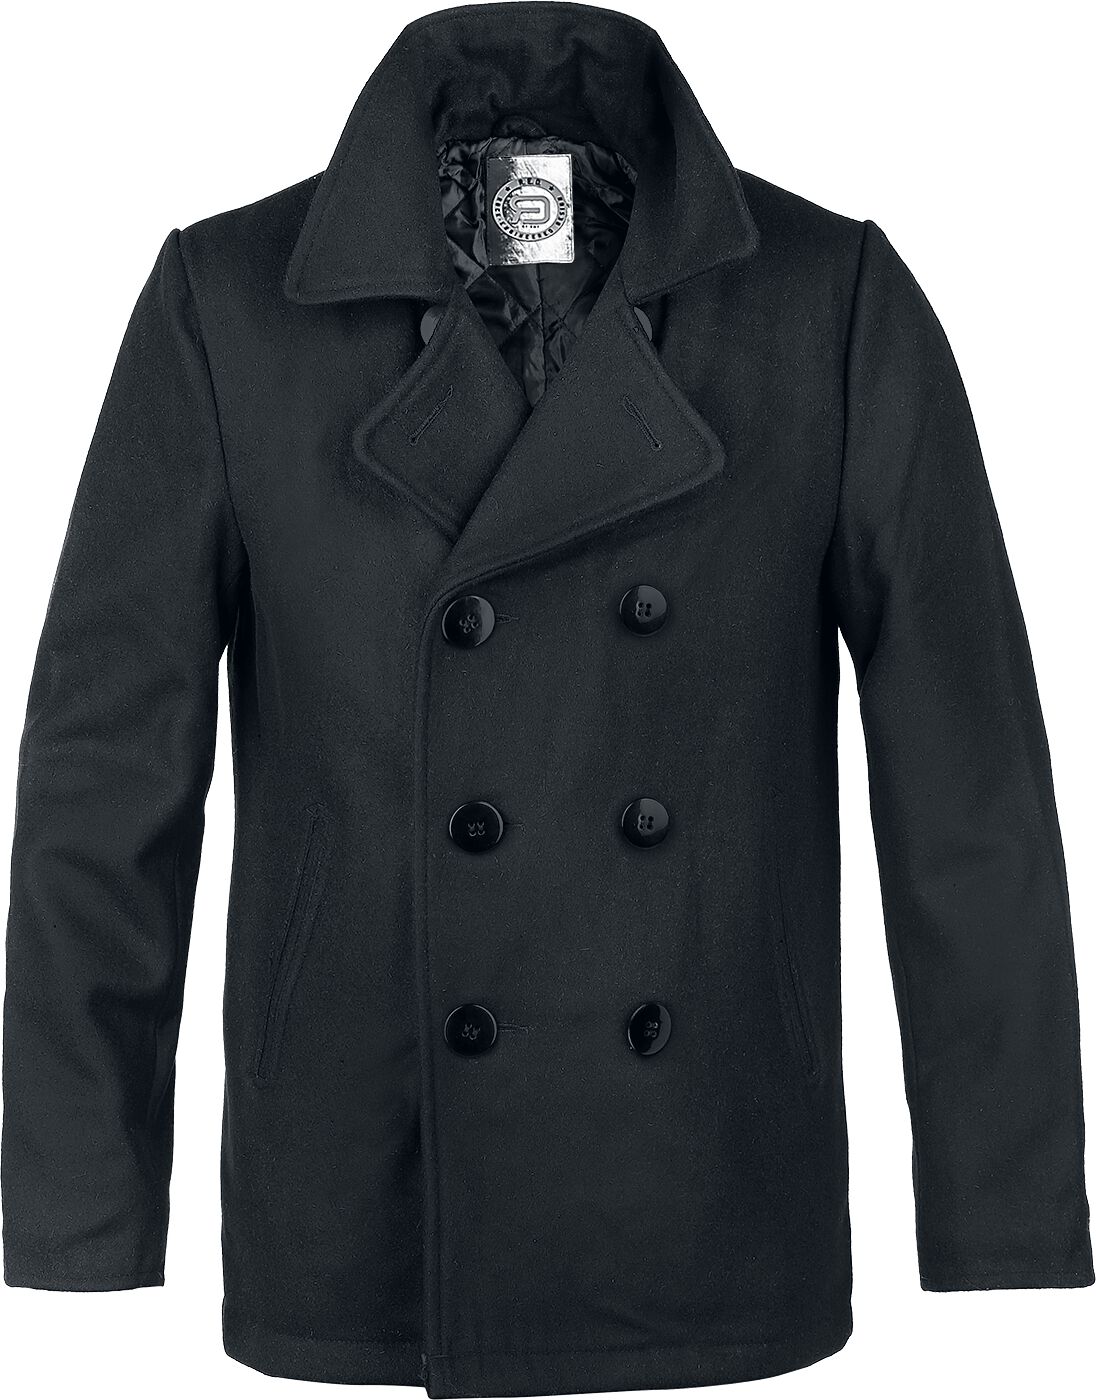 Image of Giacca invernale di RED by EMP - Pea Coat - S a 5XL - Uomo - nero